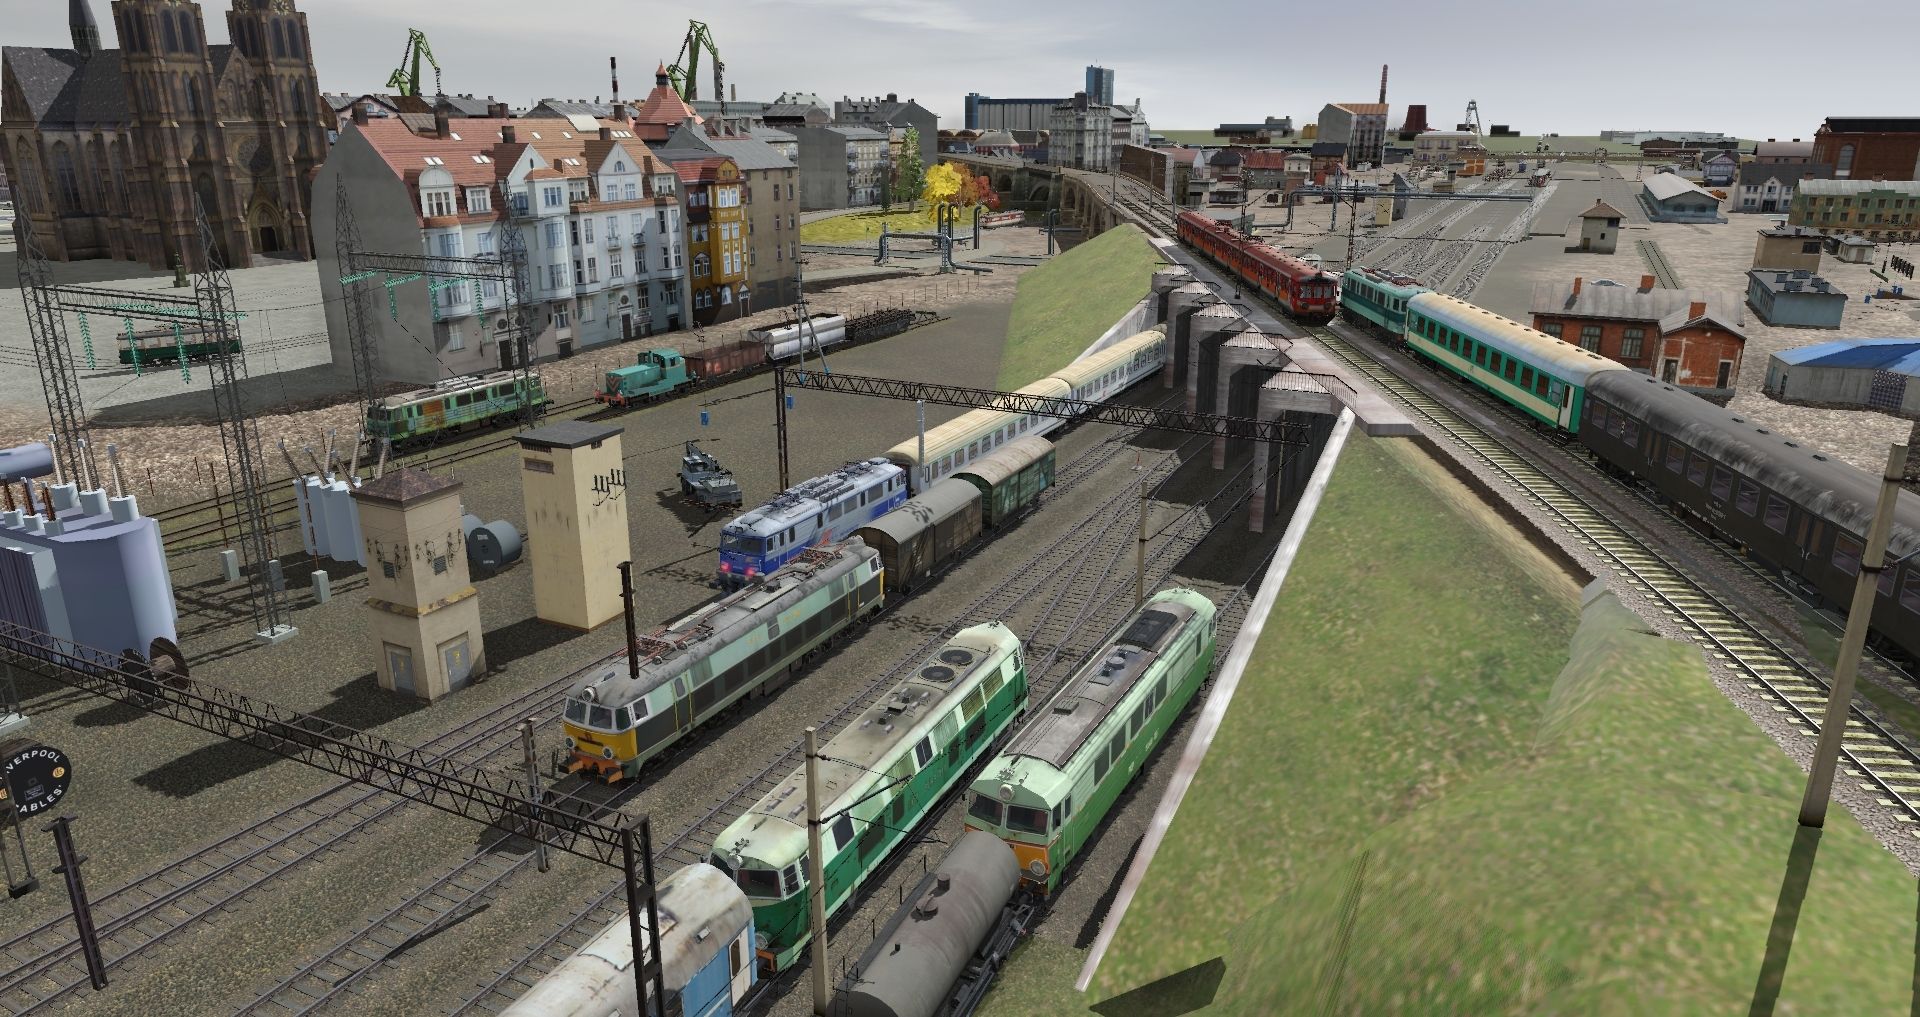 PKP-traction-and-rolling-stock-in-my-fictional-Polish-city..jpg